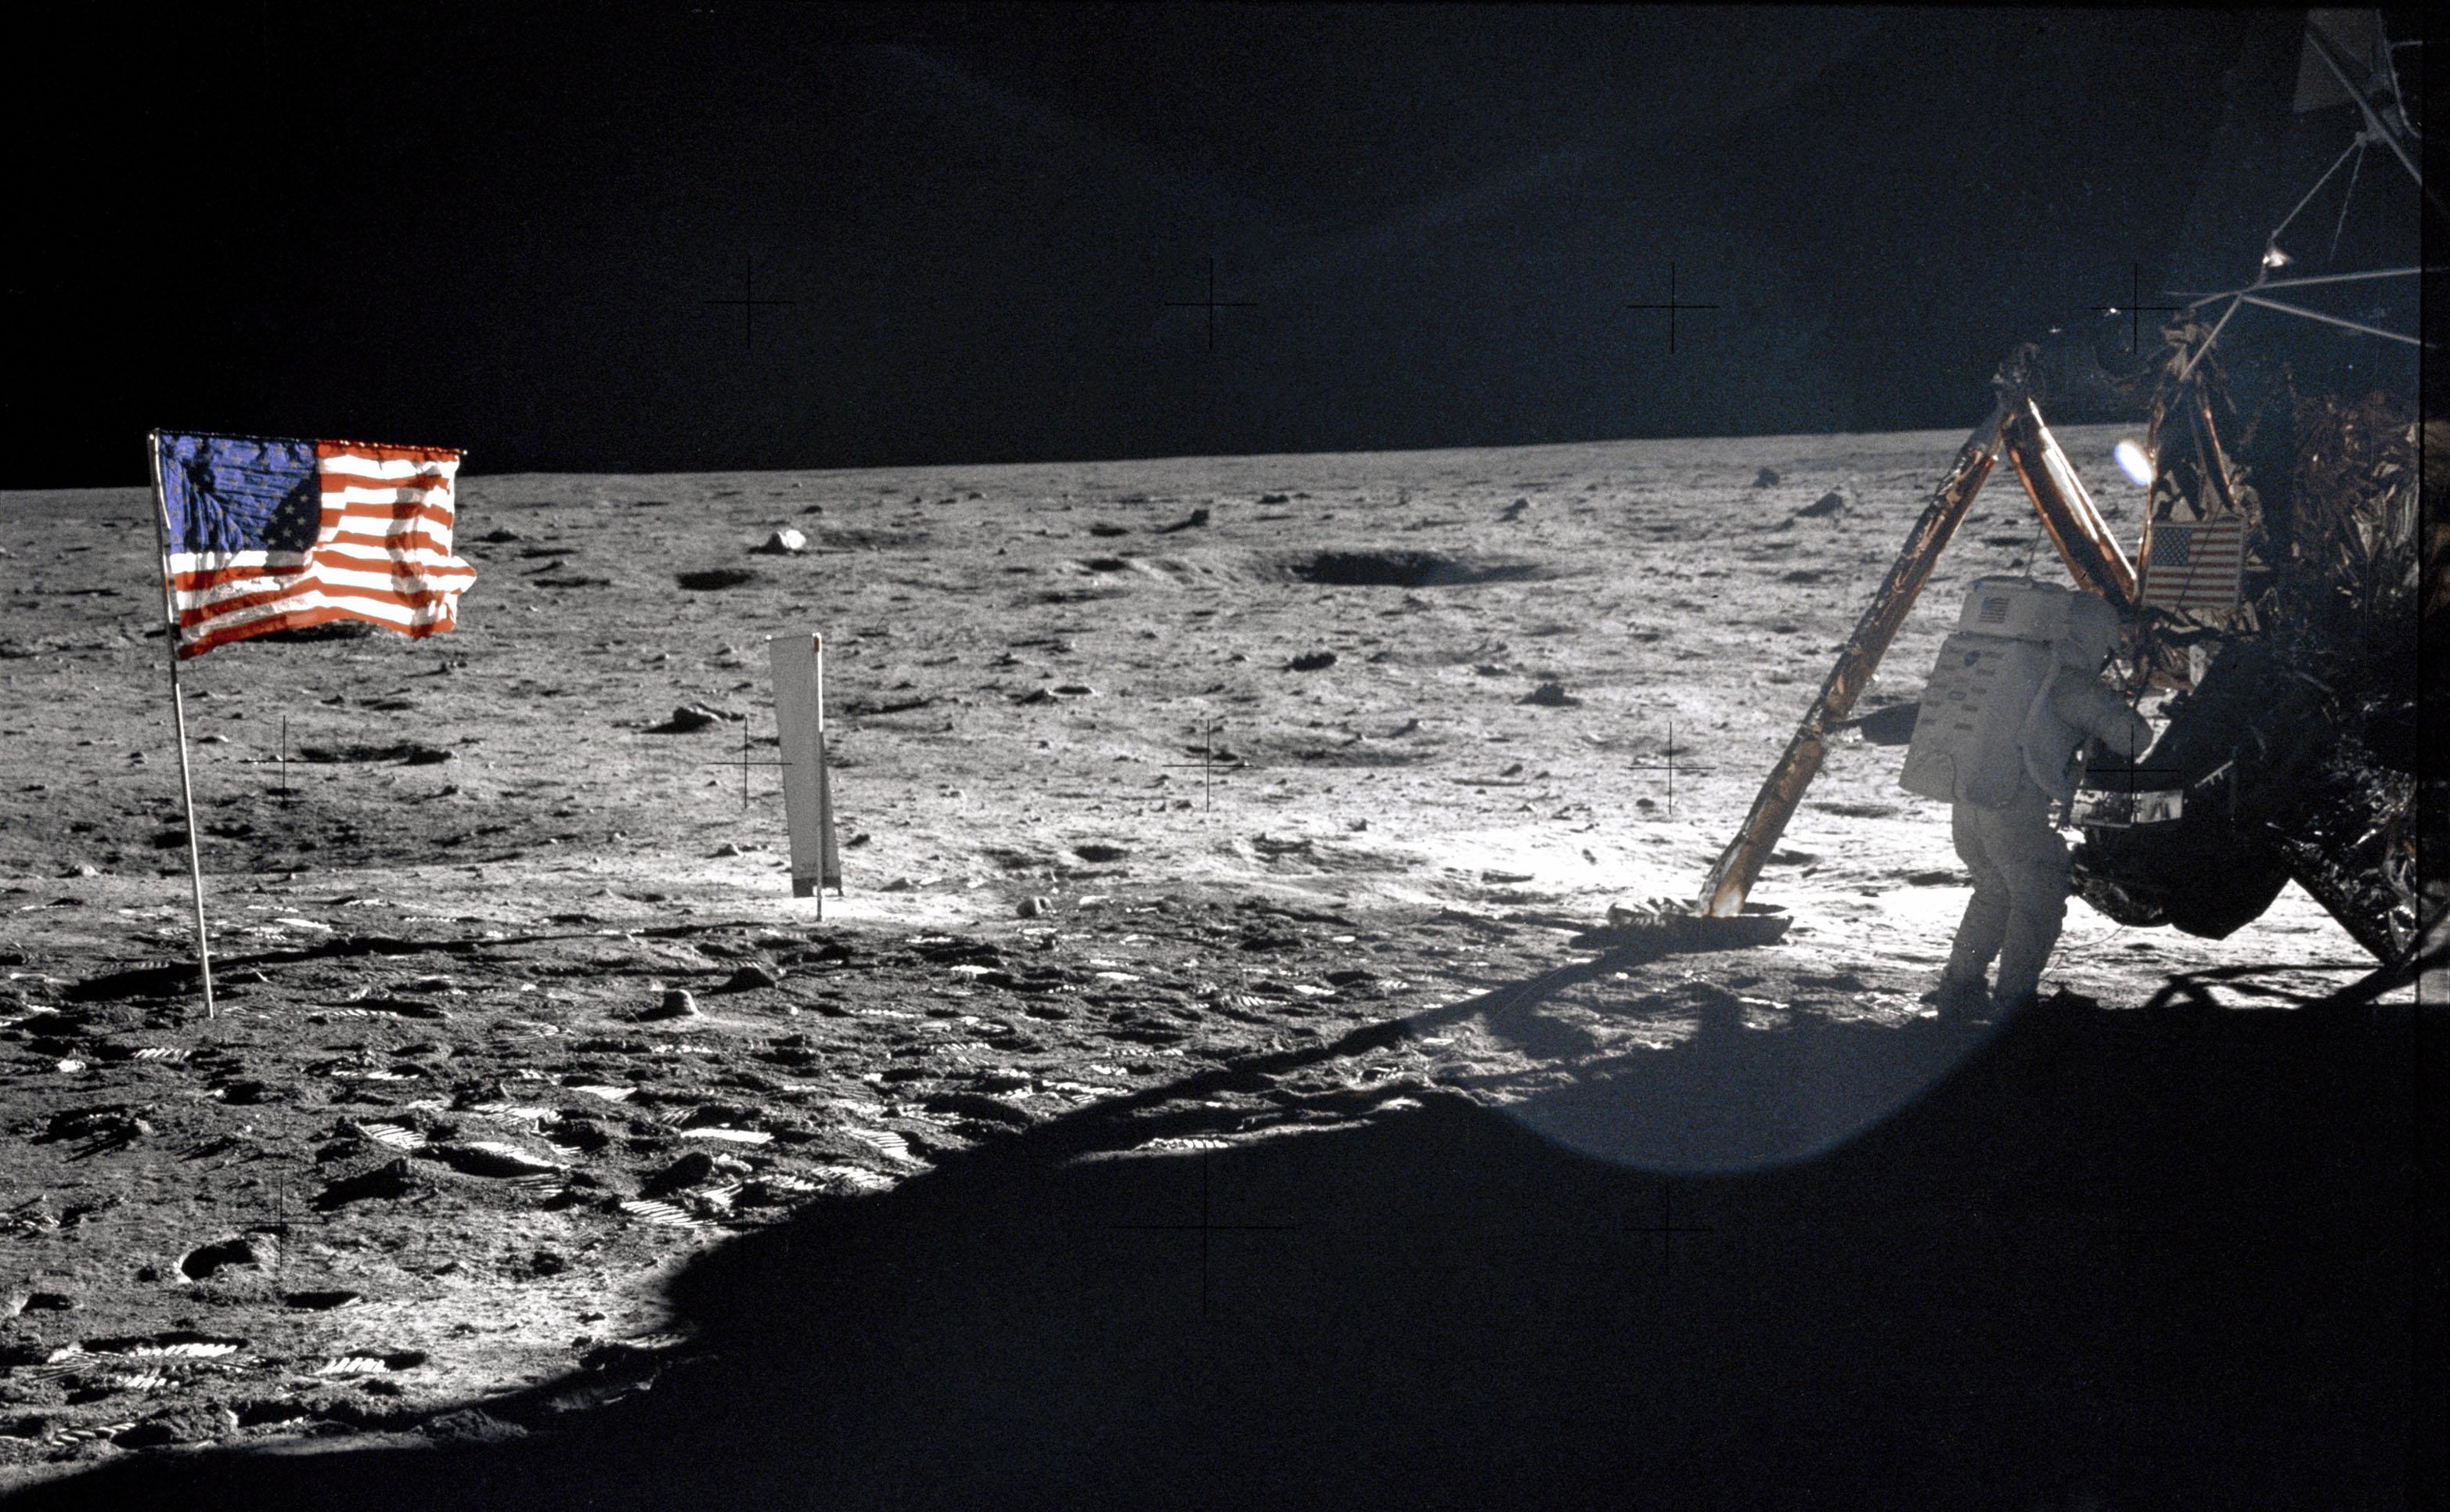 To the far right of this image, an astronaut in a white spacesuit has his back to the camera while he works near the lunar lander. To the far left is an American flag on a pole in the lunar soil.